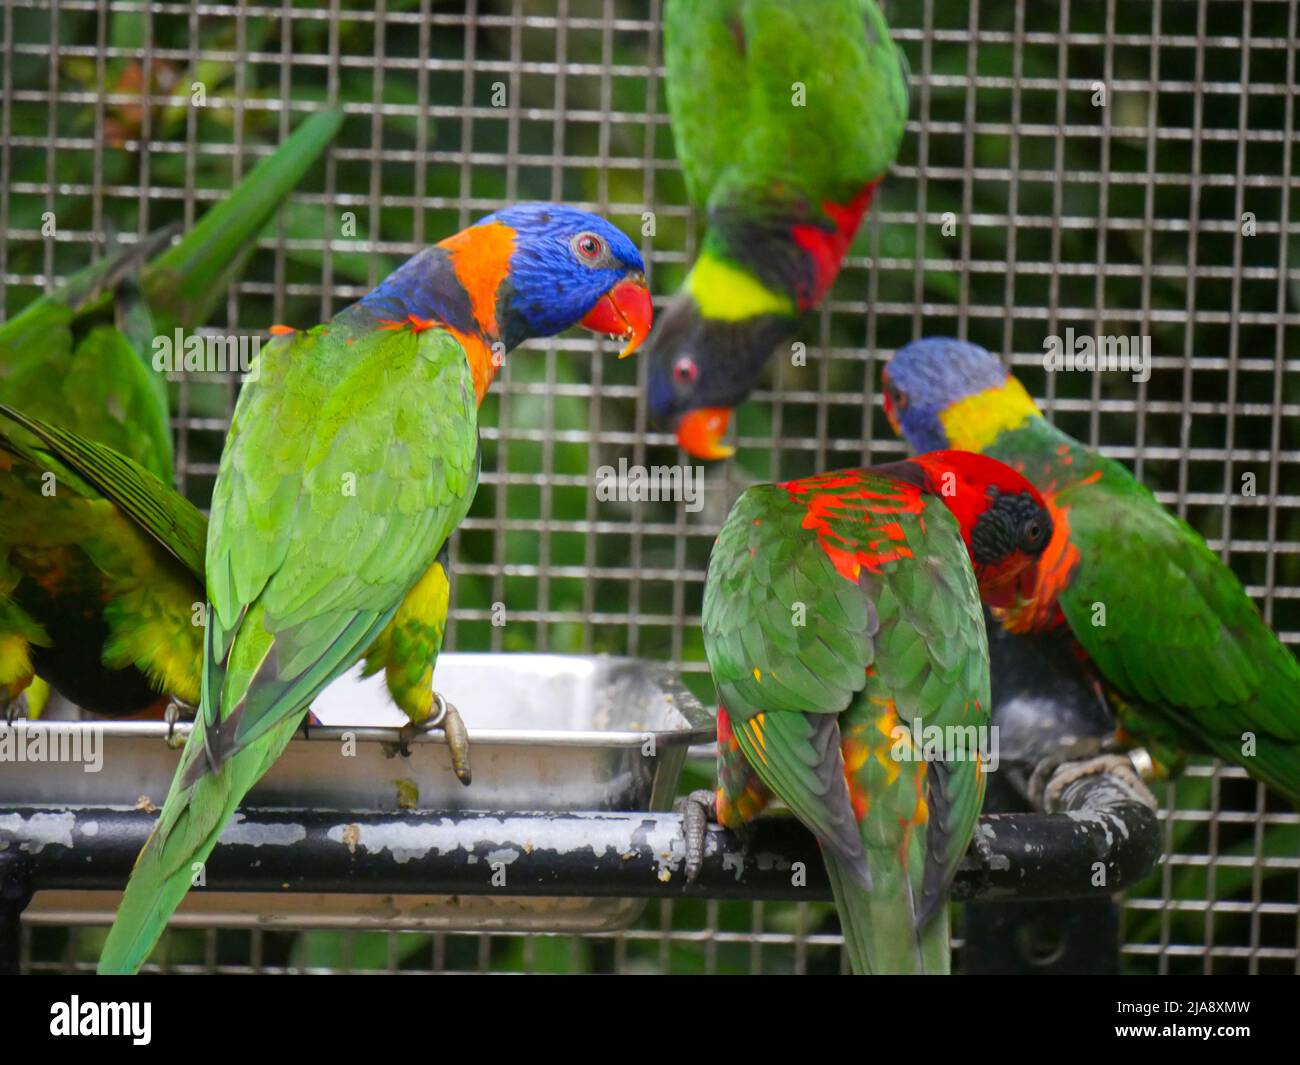 Red collared lorikeet (Trichoglossus rubritorquis) face side view and other lorikeets, seated on metal food plate Stock Photo